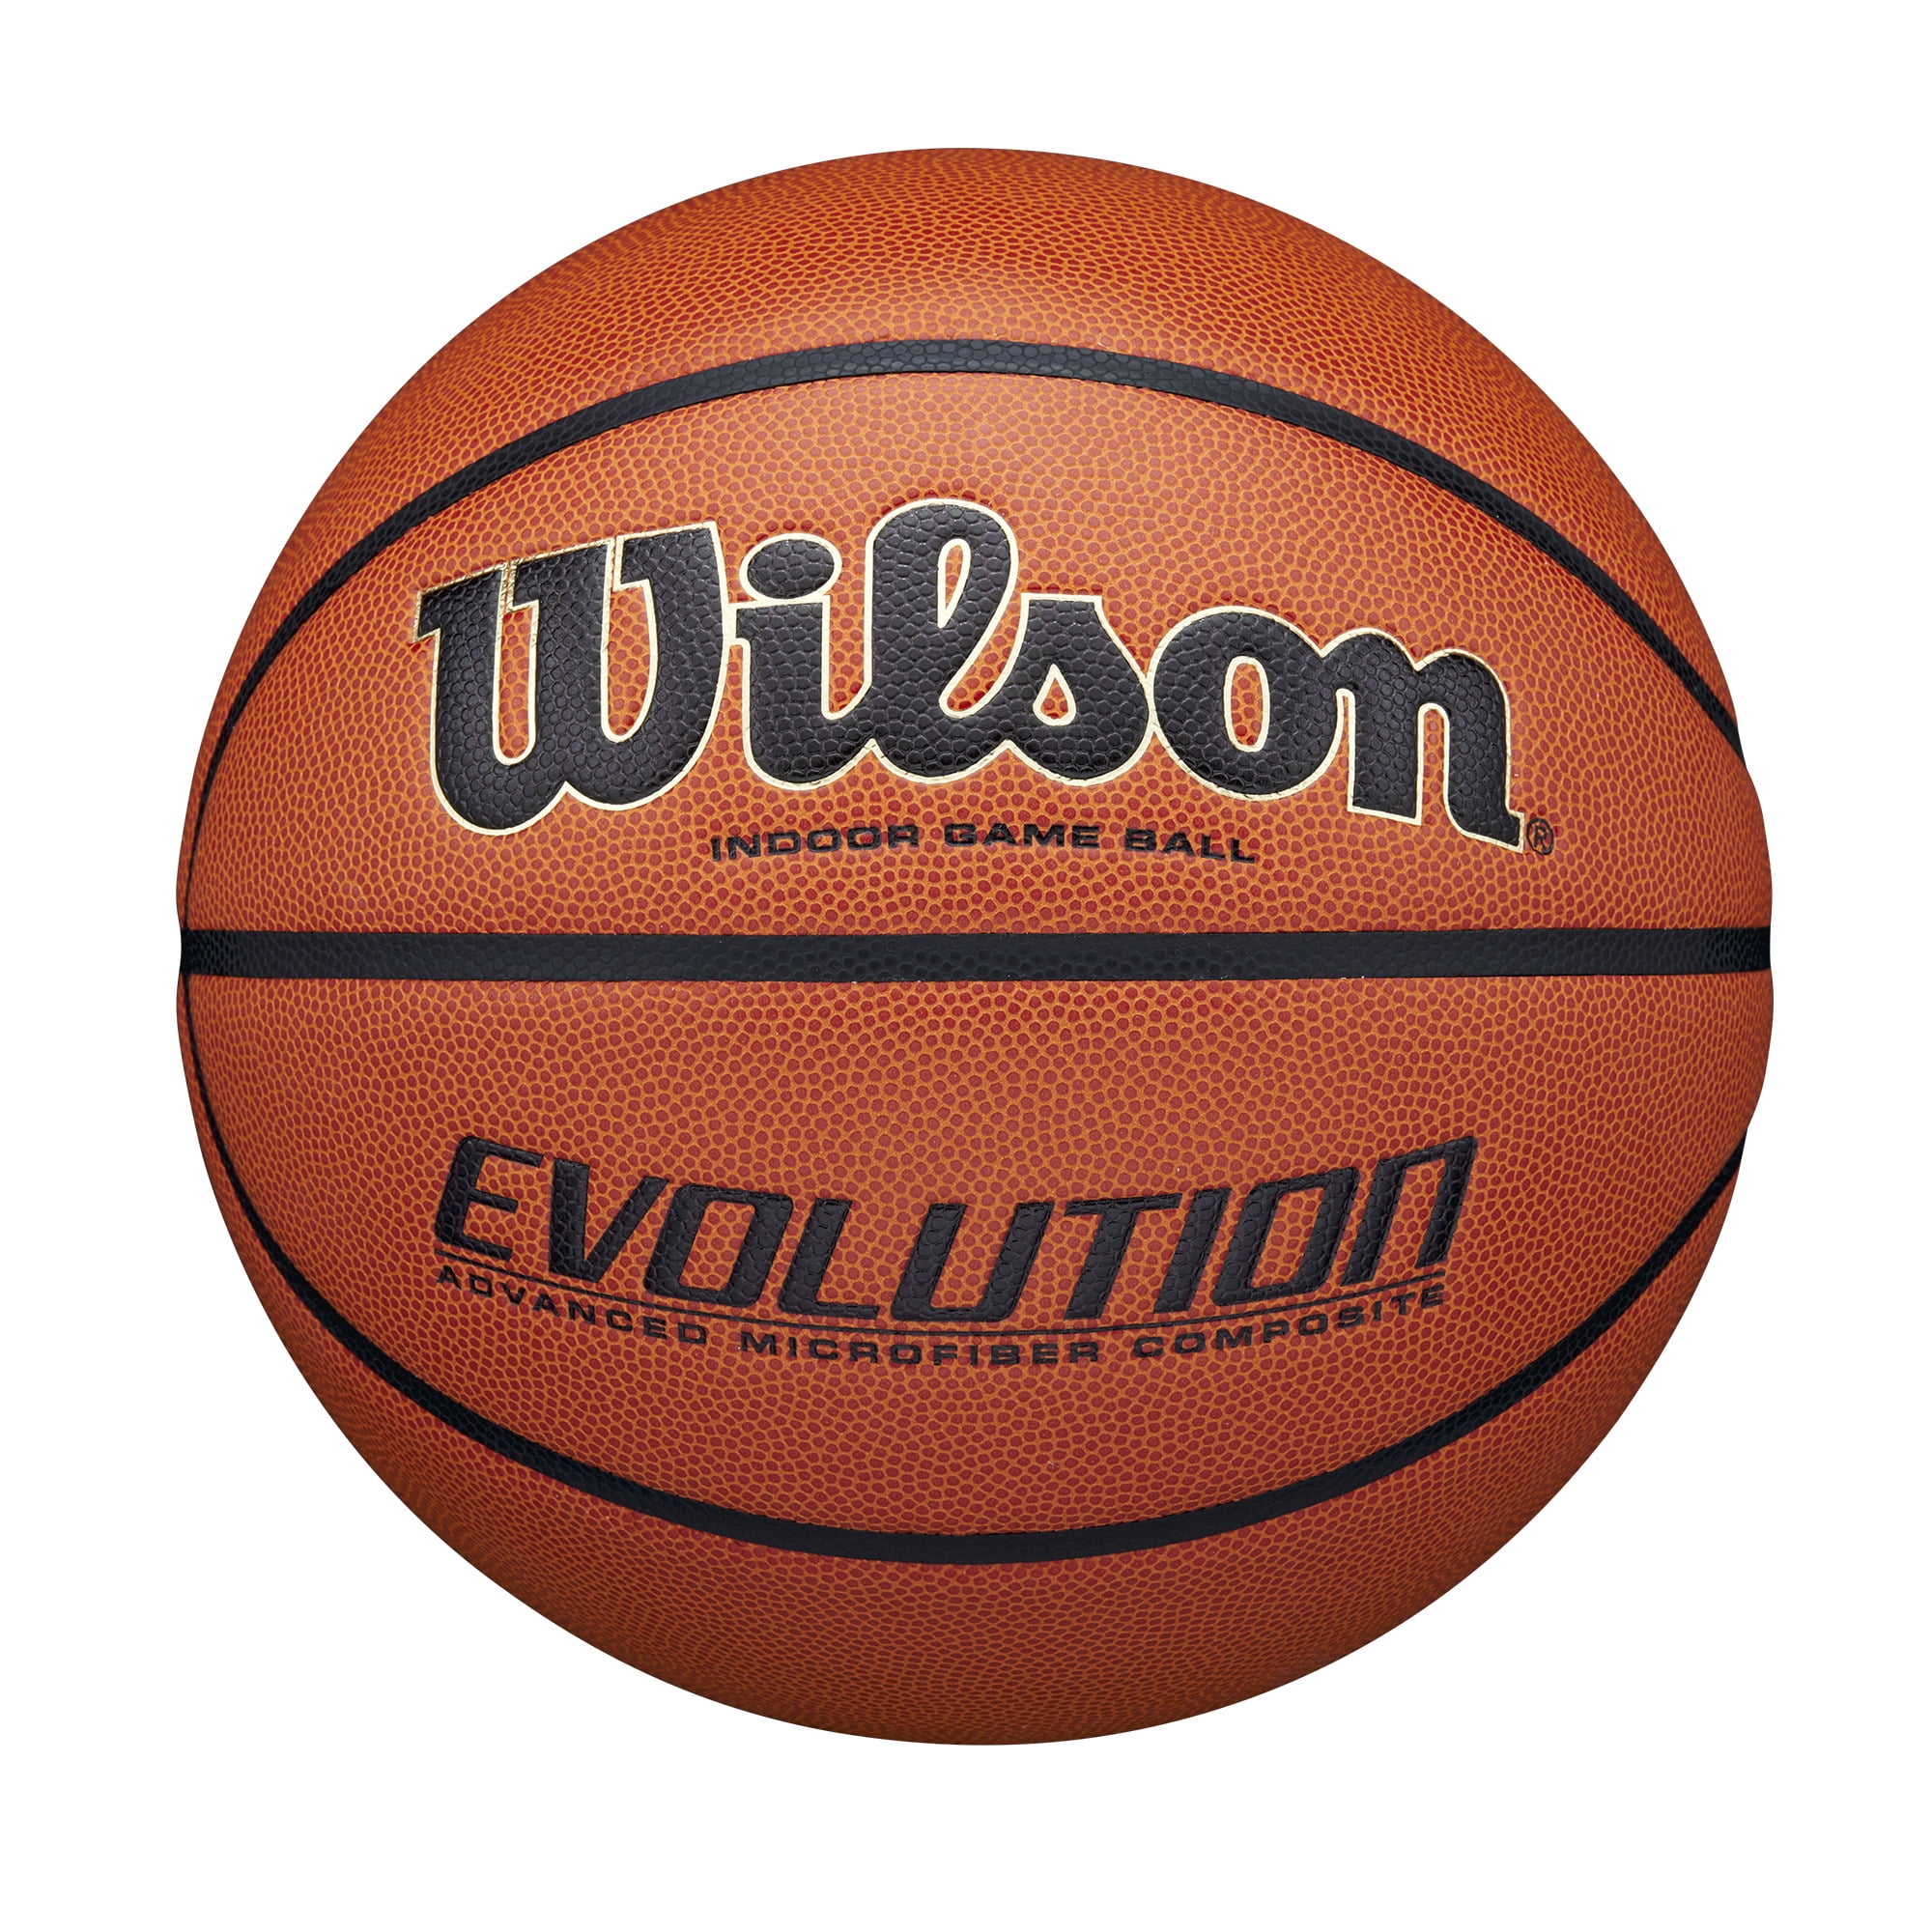 Evolution of Basketball Cushion Cover Basketball Gift Basketball Gift Evolution of Man Basketball Gift for Sports Lover